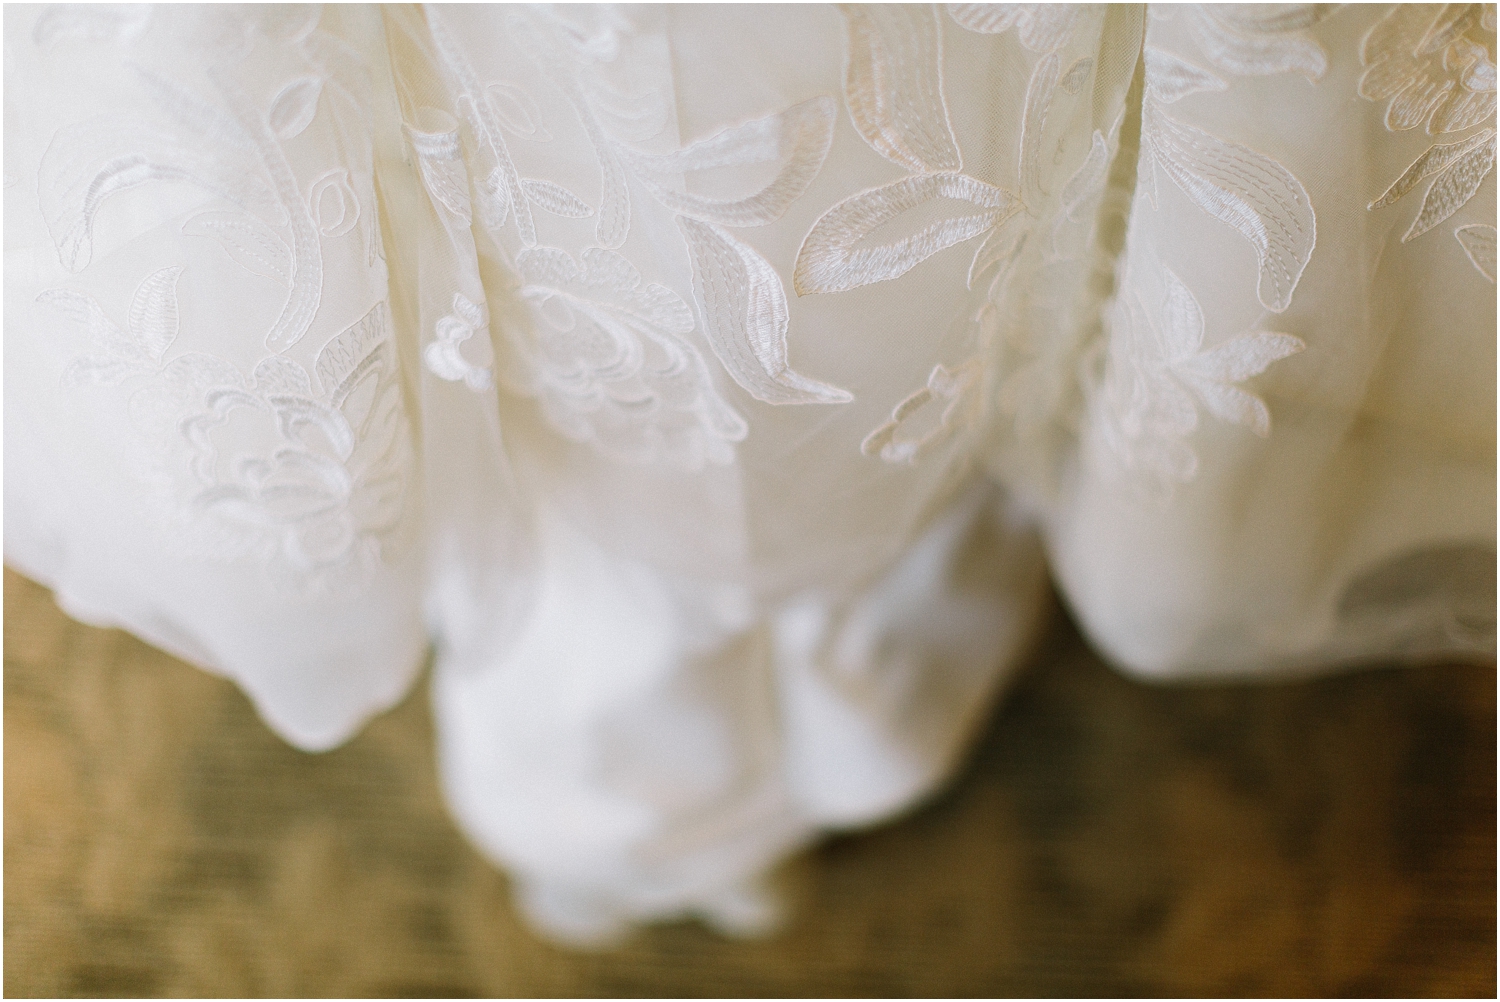 wedding dress details, lace ivory in color the edges of the gown